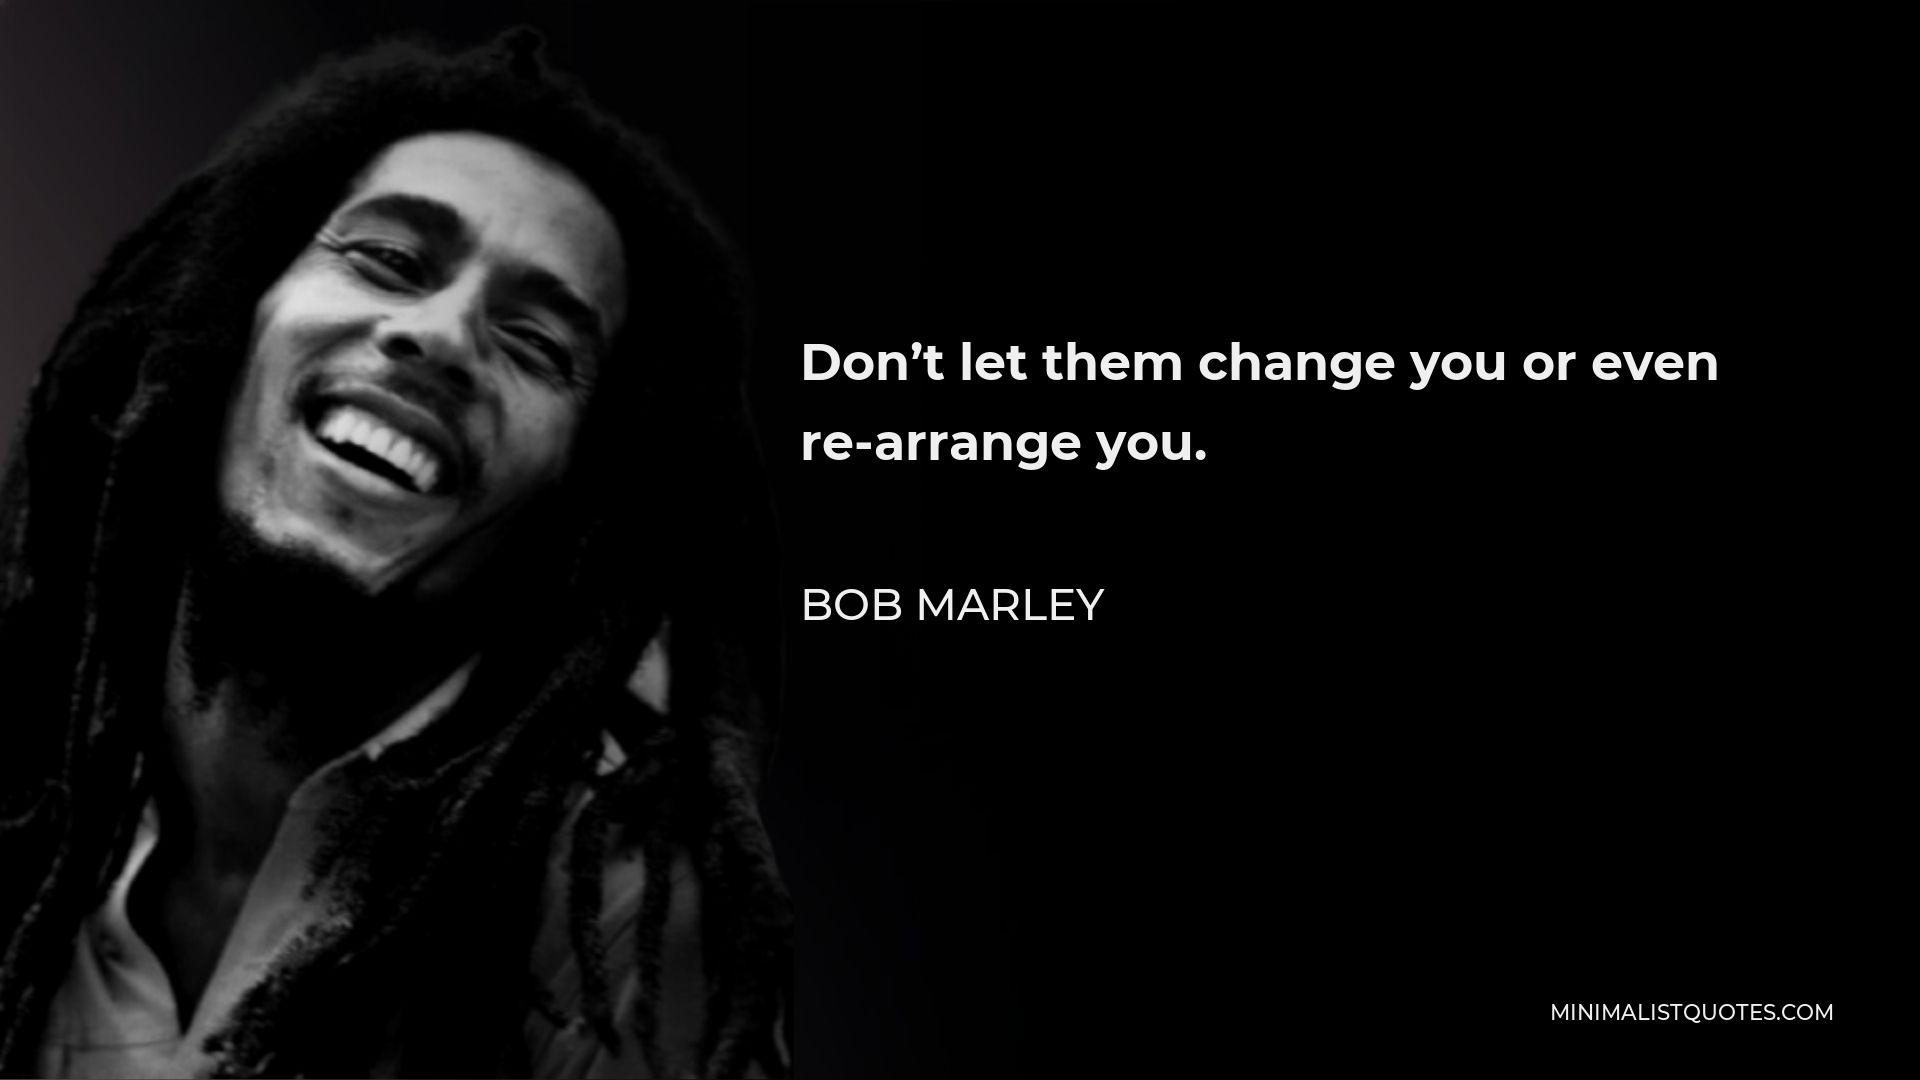 Bob Marley Quote - Don’t let them change you or even re-arrange you.